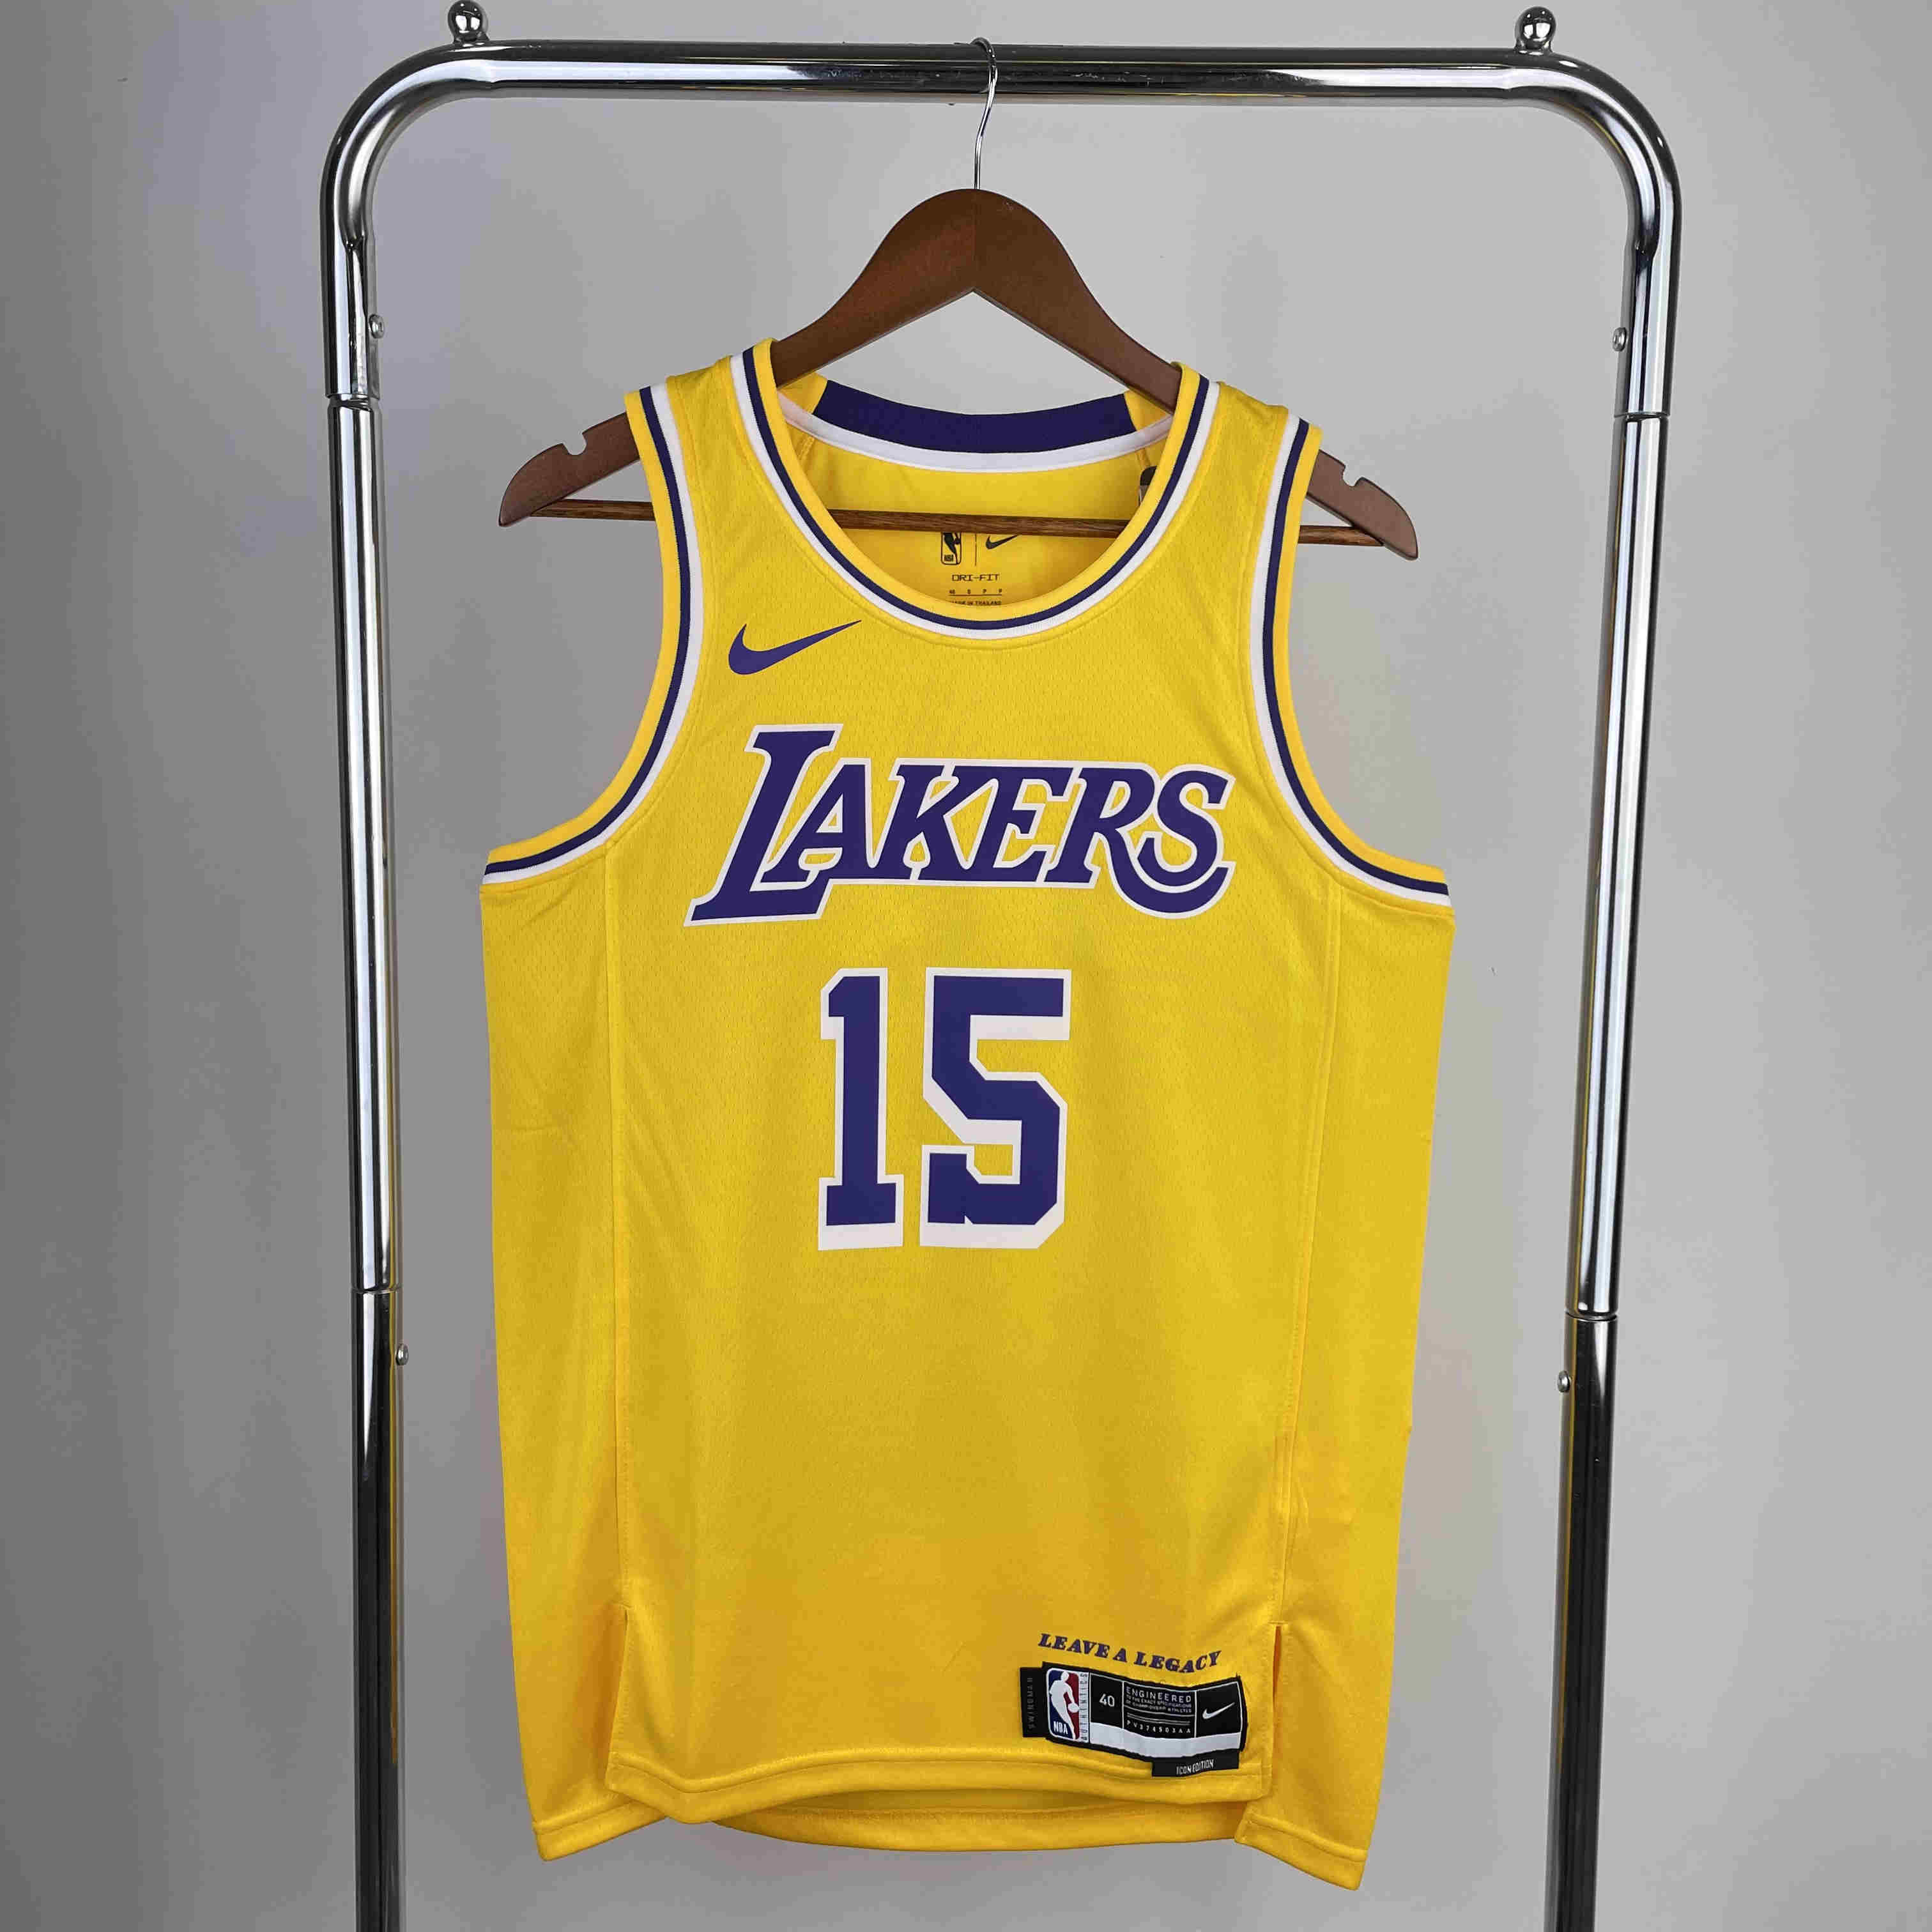 Los Angeles Lakers NBA Jersey reaves  15